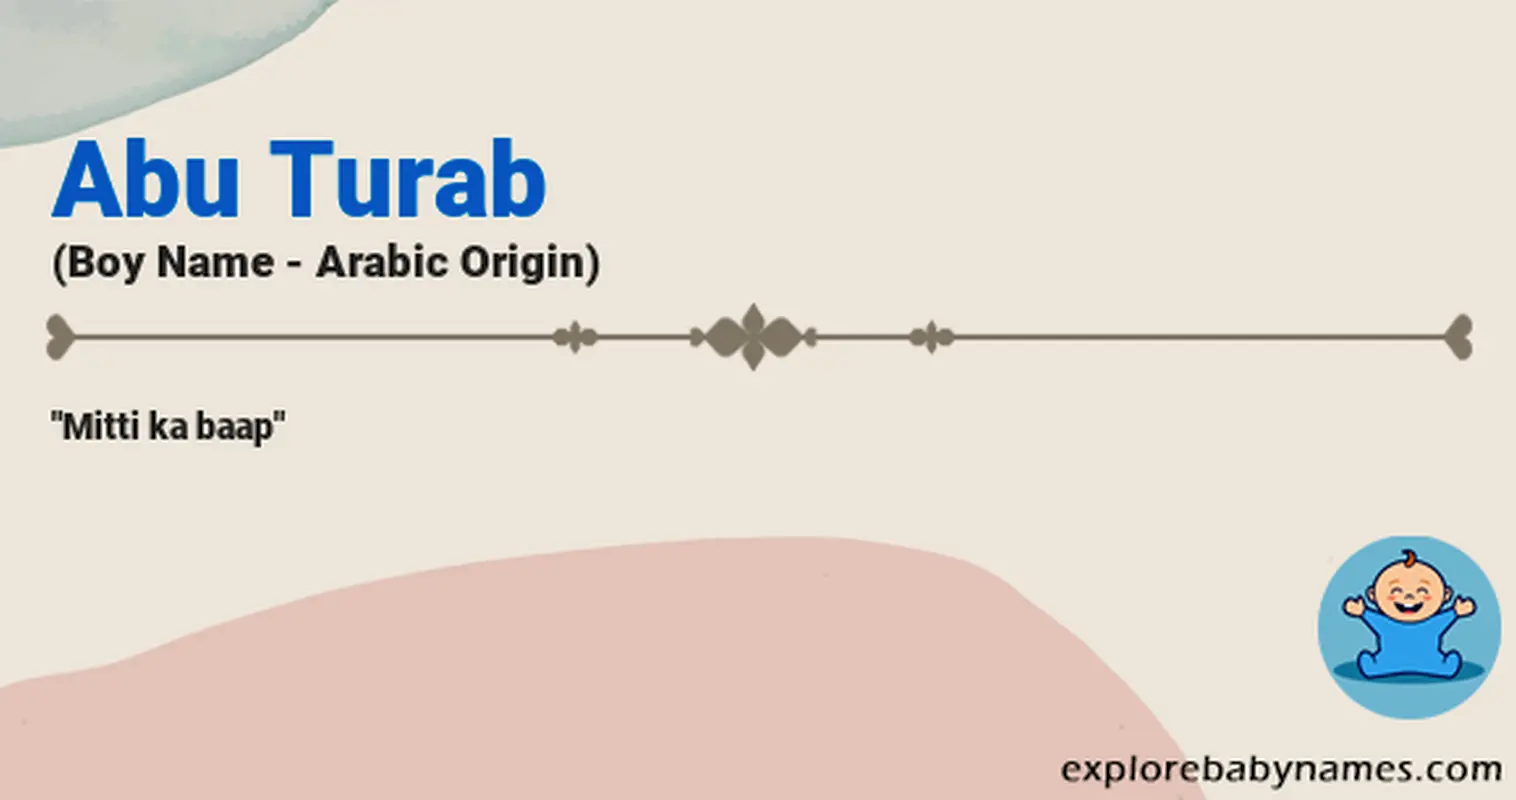 Meaning of Abu Turab